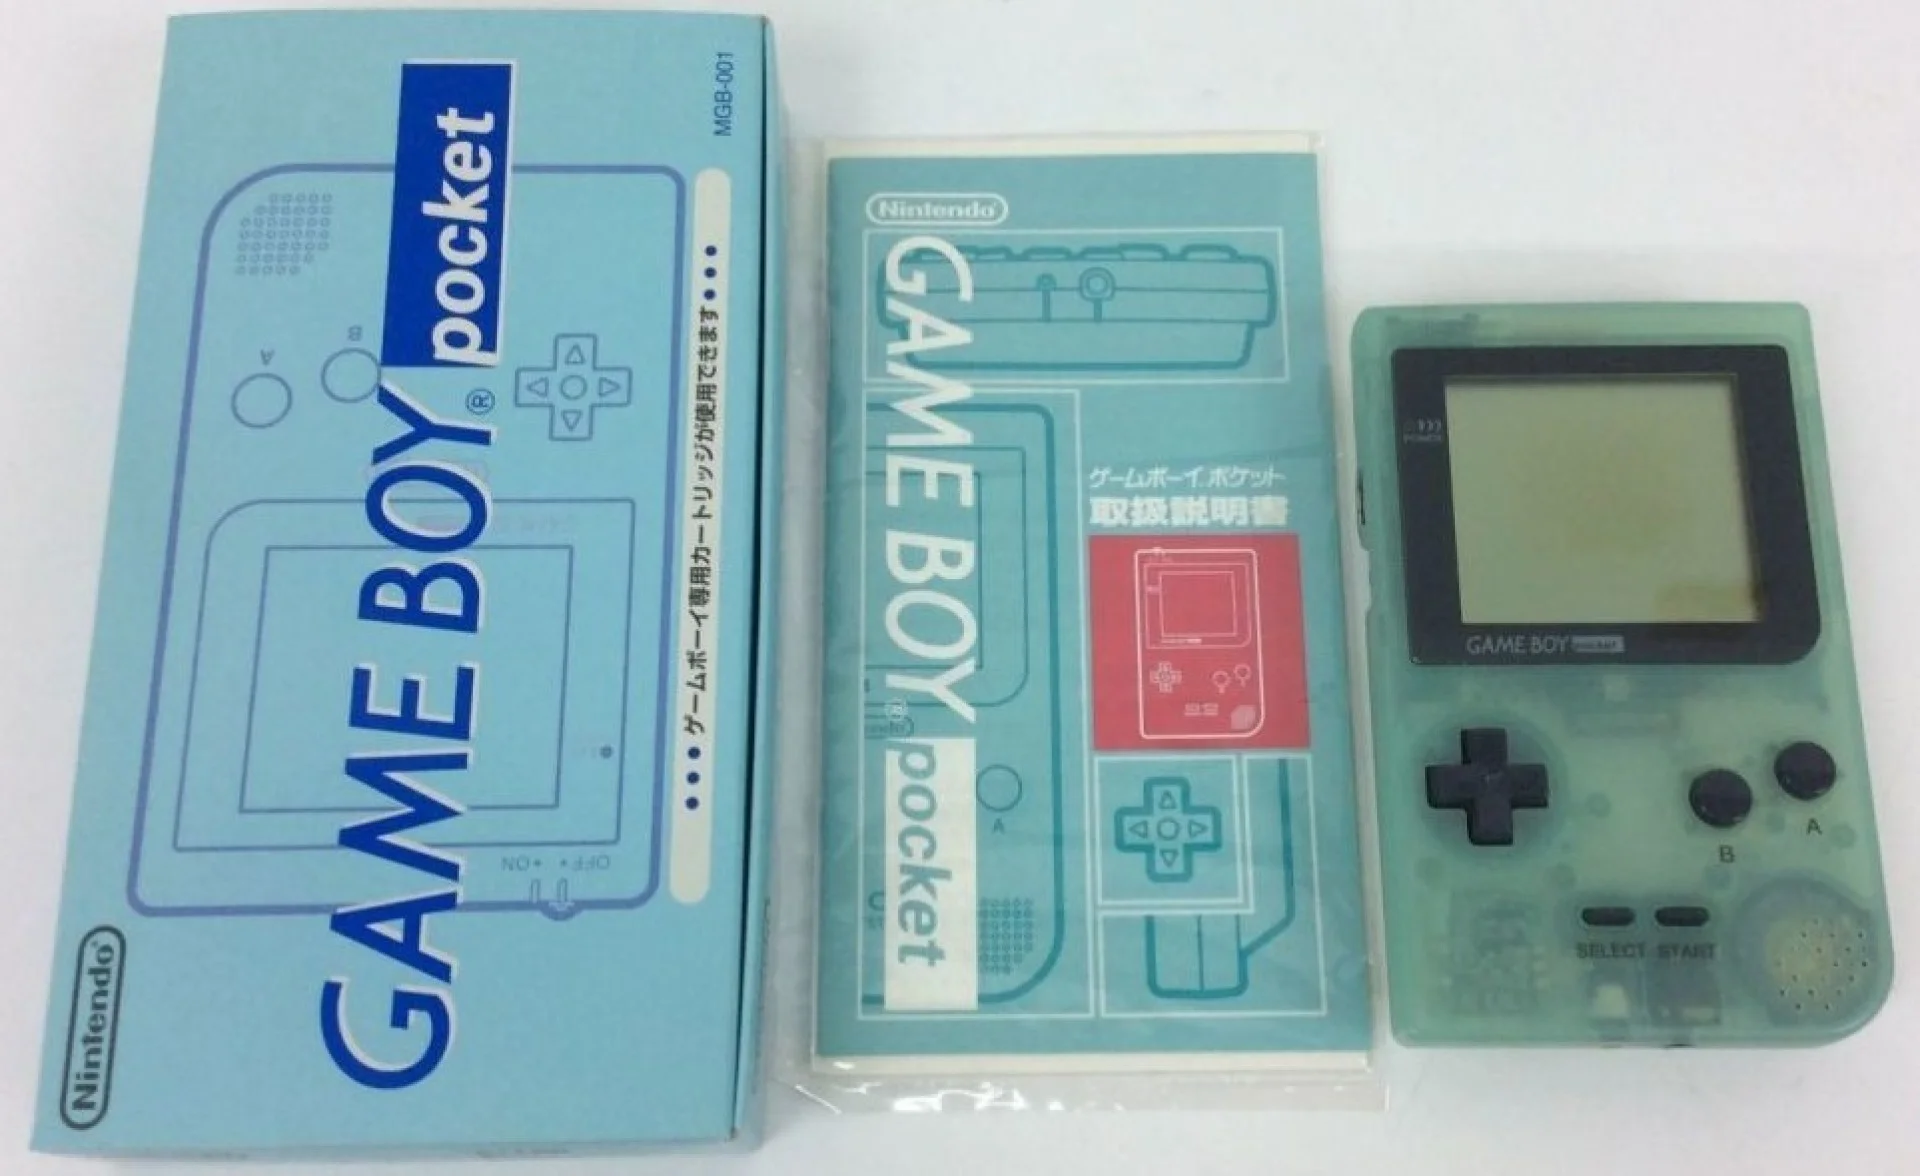  Nintendo Game Boy Pocket Ice Blue Clear Console [JP]